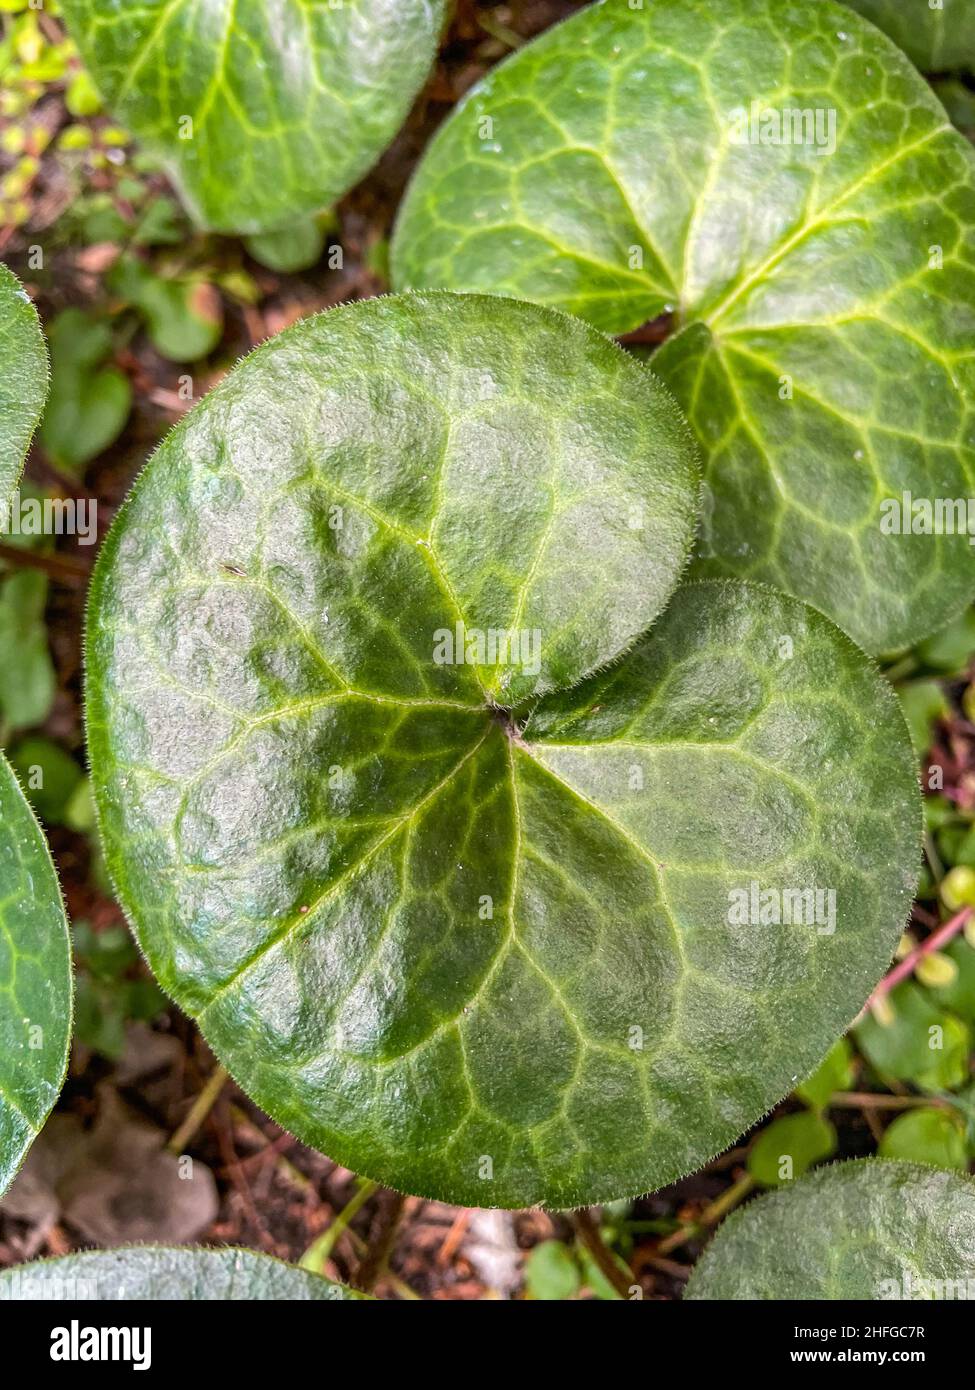 European wild ginger (Asarum europaeum) is a species of flowering plant in the birthwort family Aristolochiaceae, native to large parts of temperate E Stock Photo